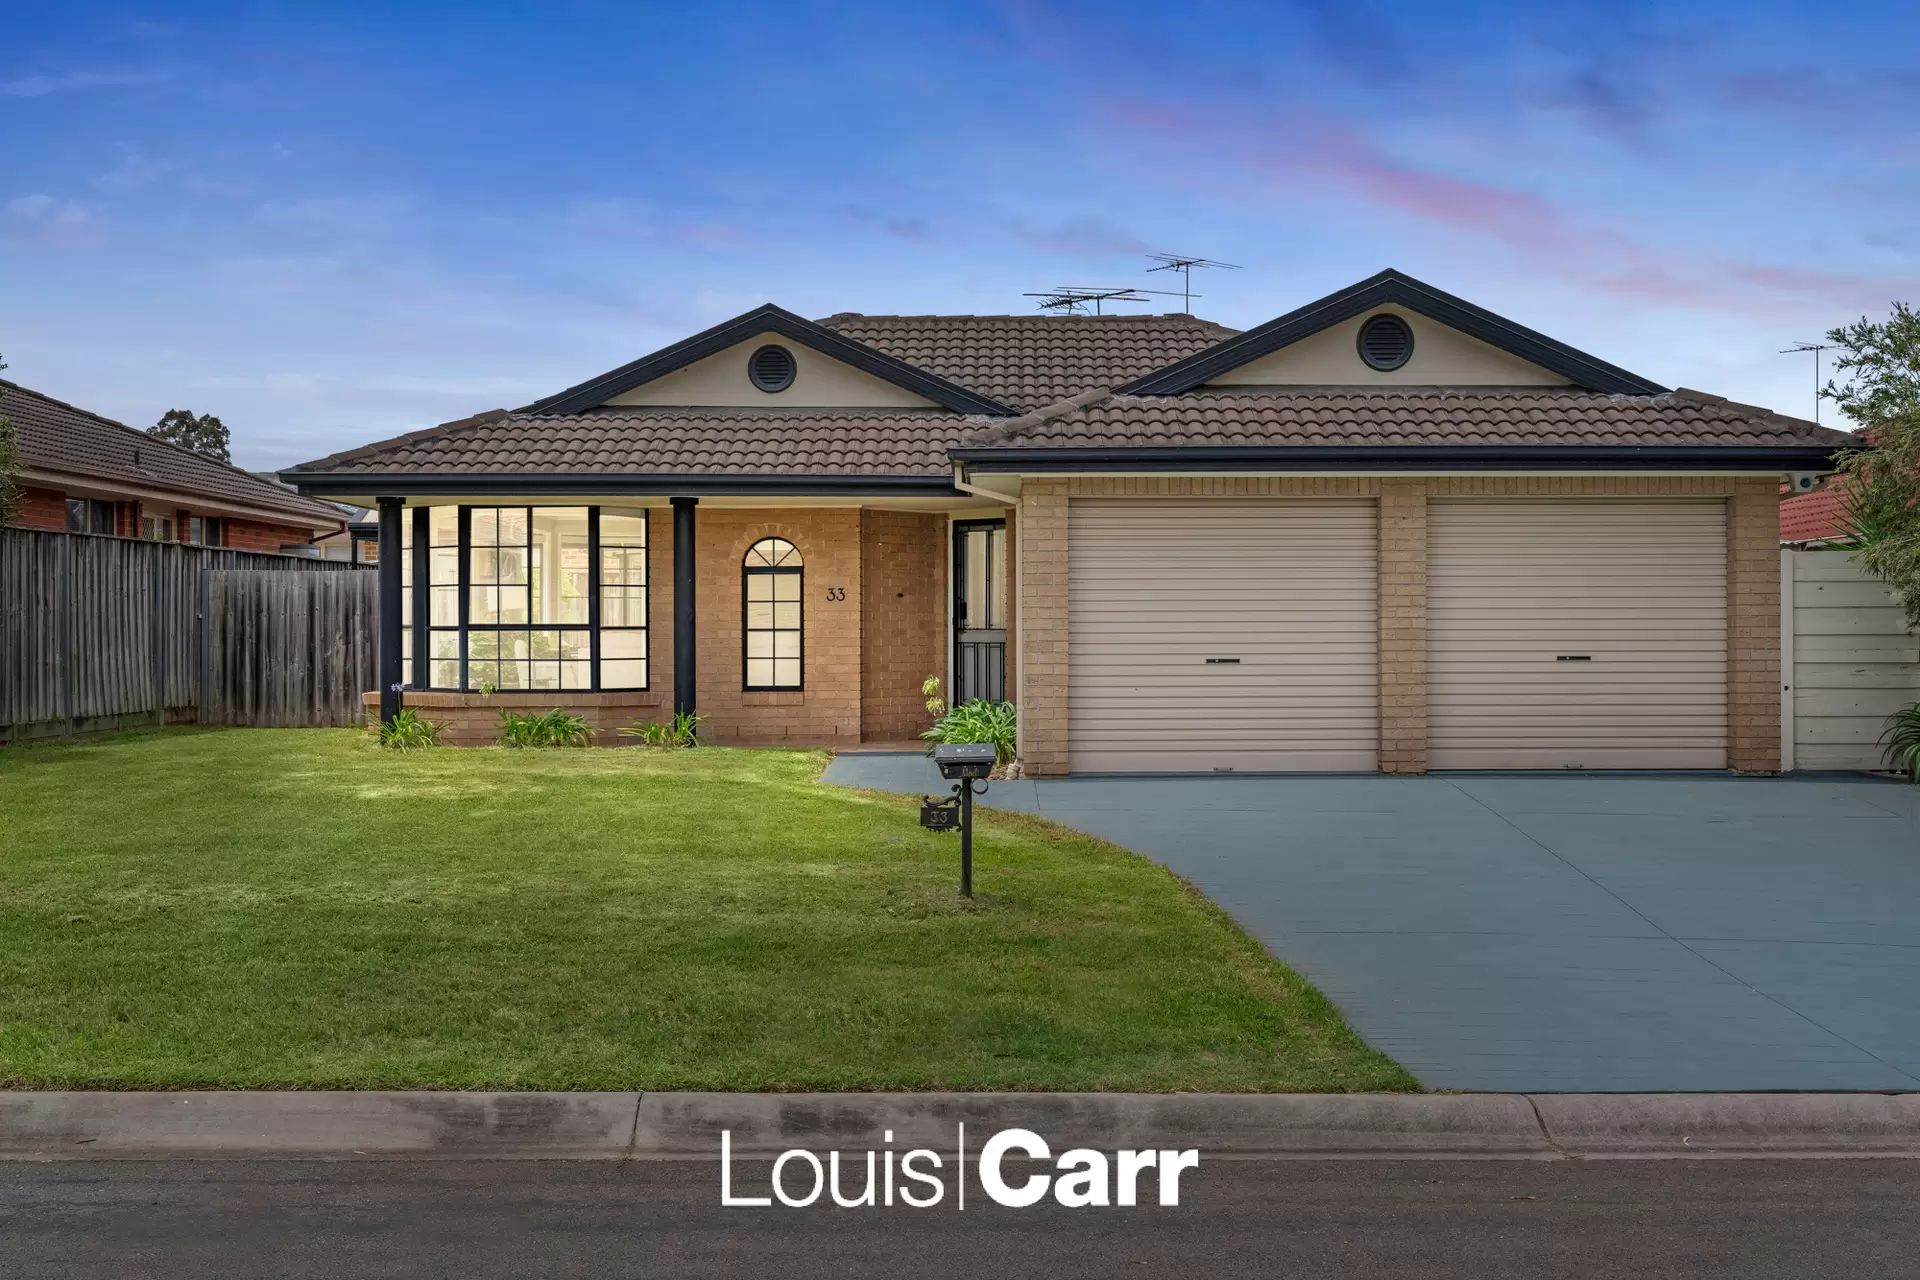 Photo #1: 33 Marsden Avenue, Kellyville - For Sale by Louis Carr Real Estate